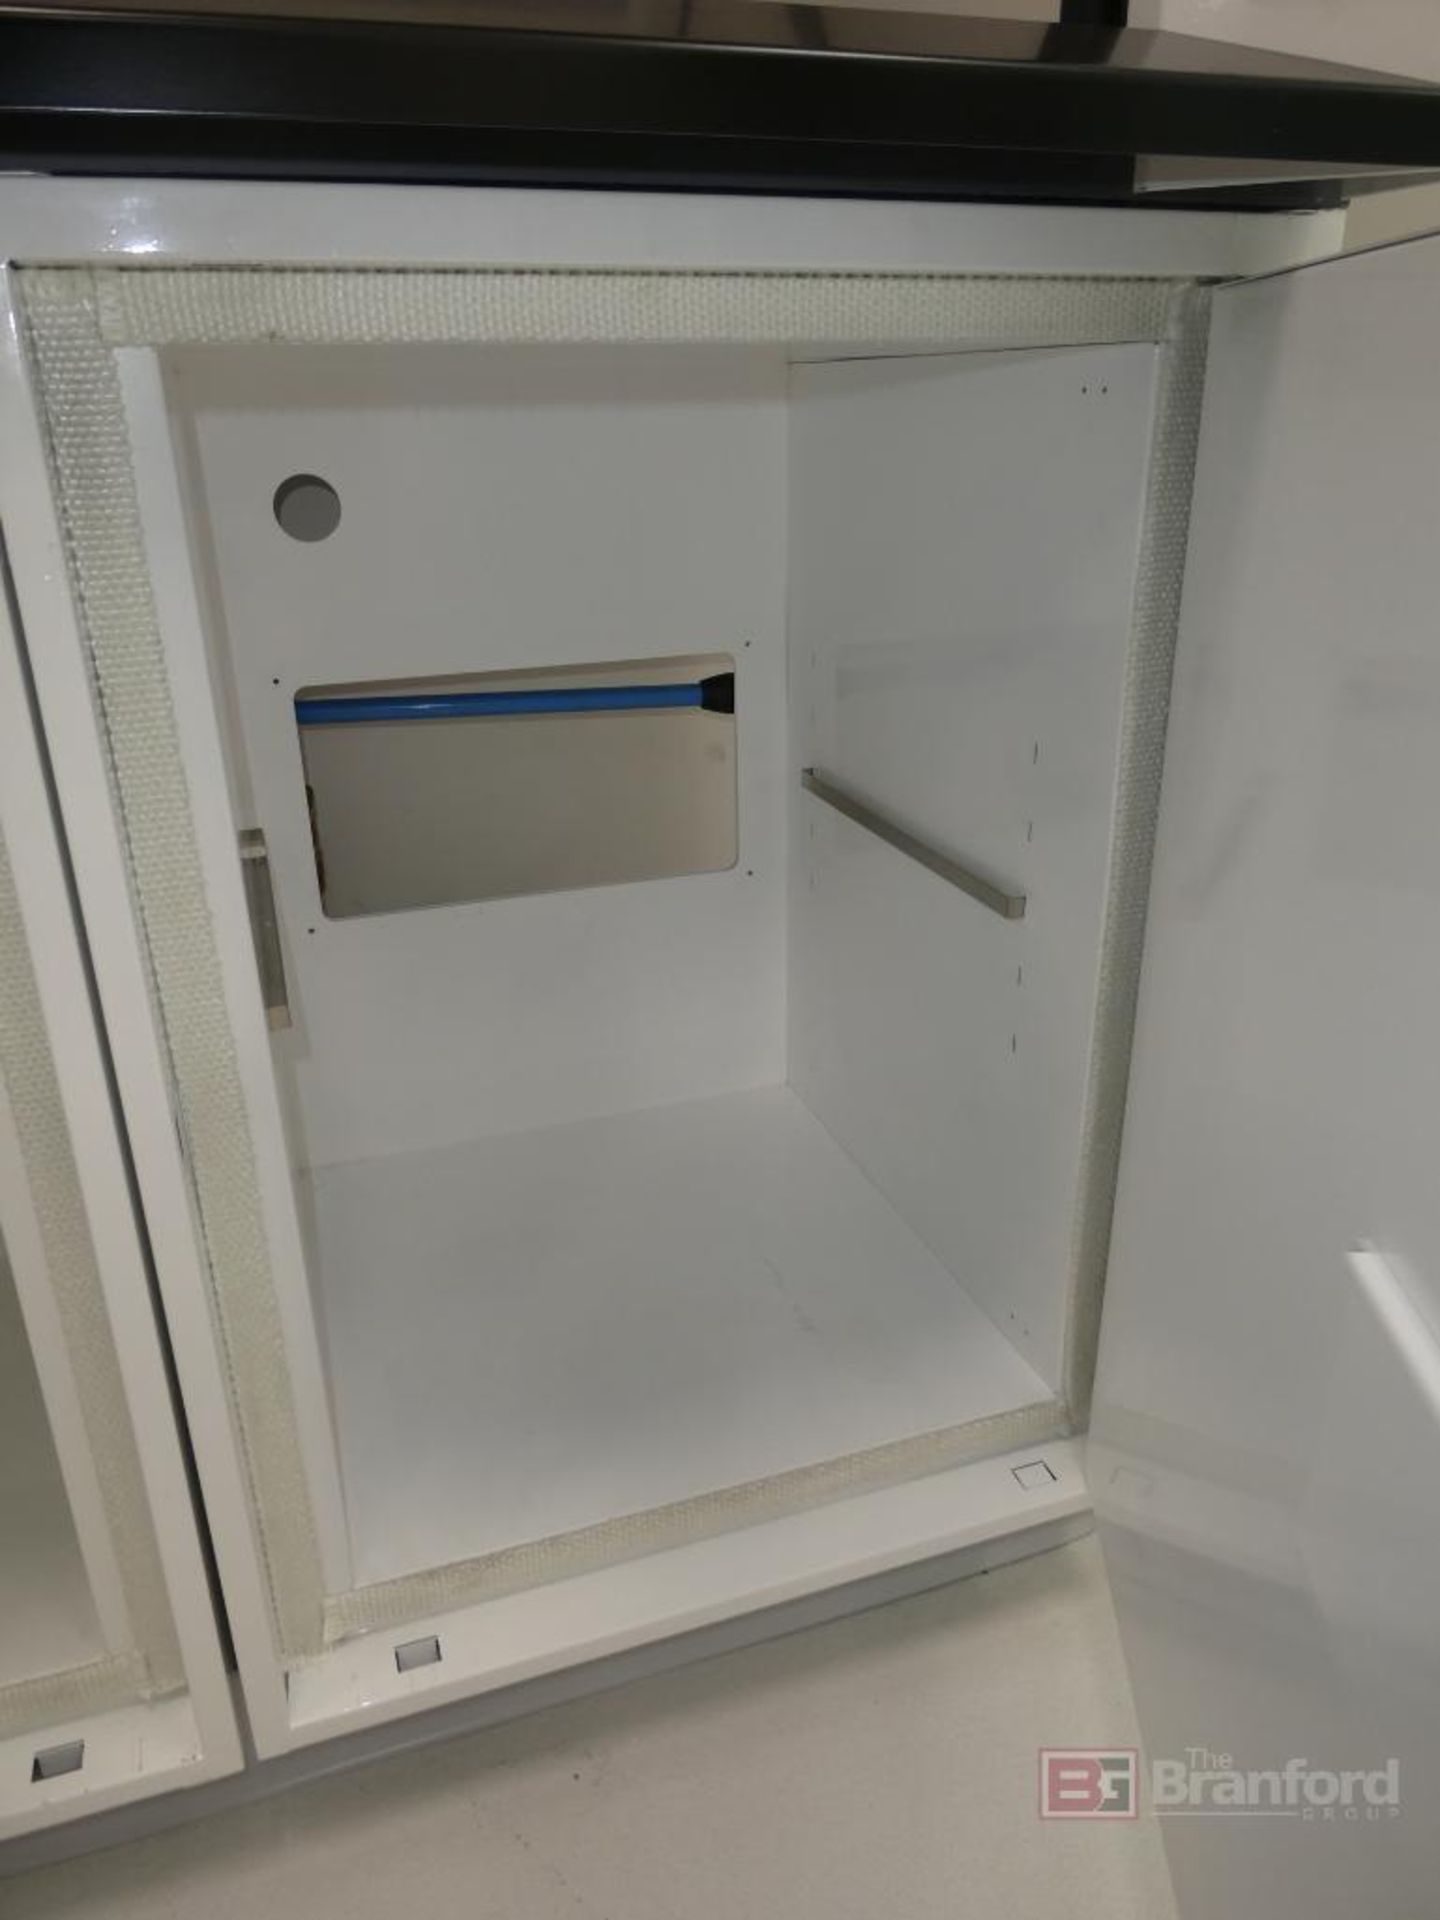 OnePointe Solutions Lab Fume Hood - Image 5 of 5